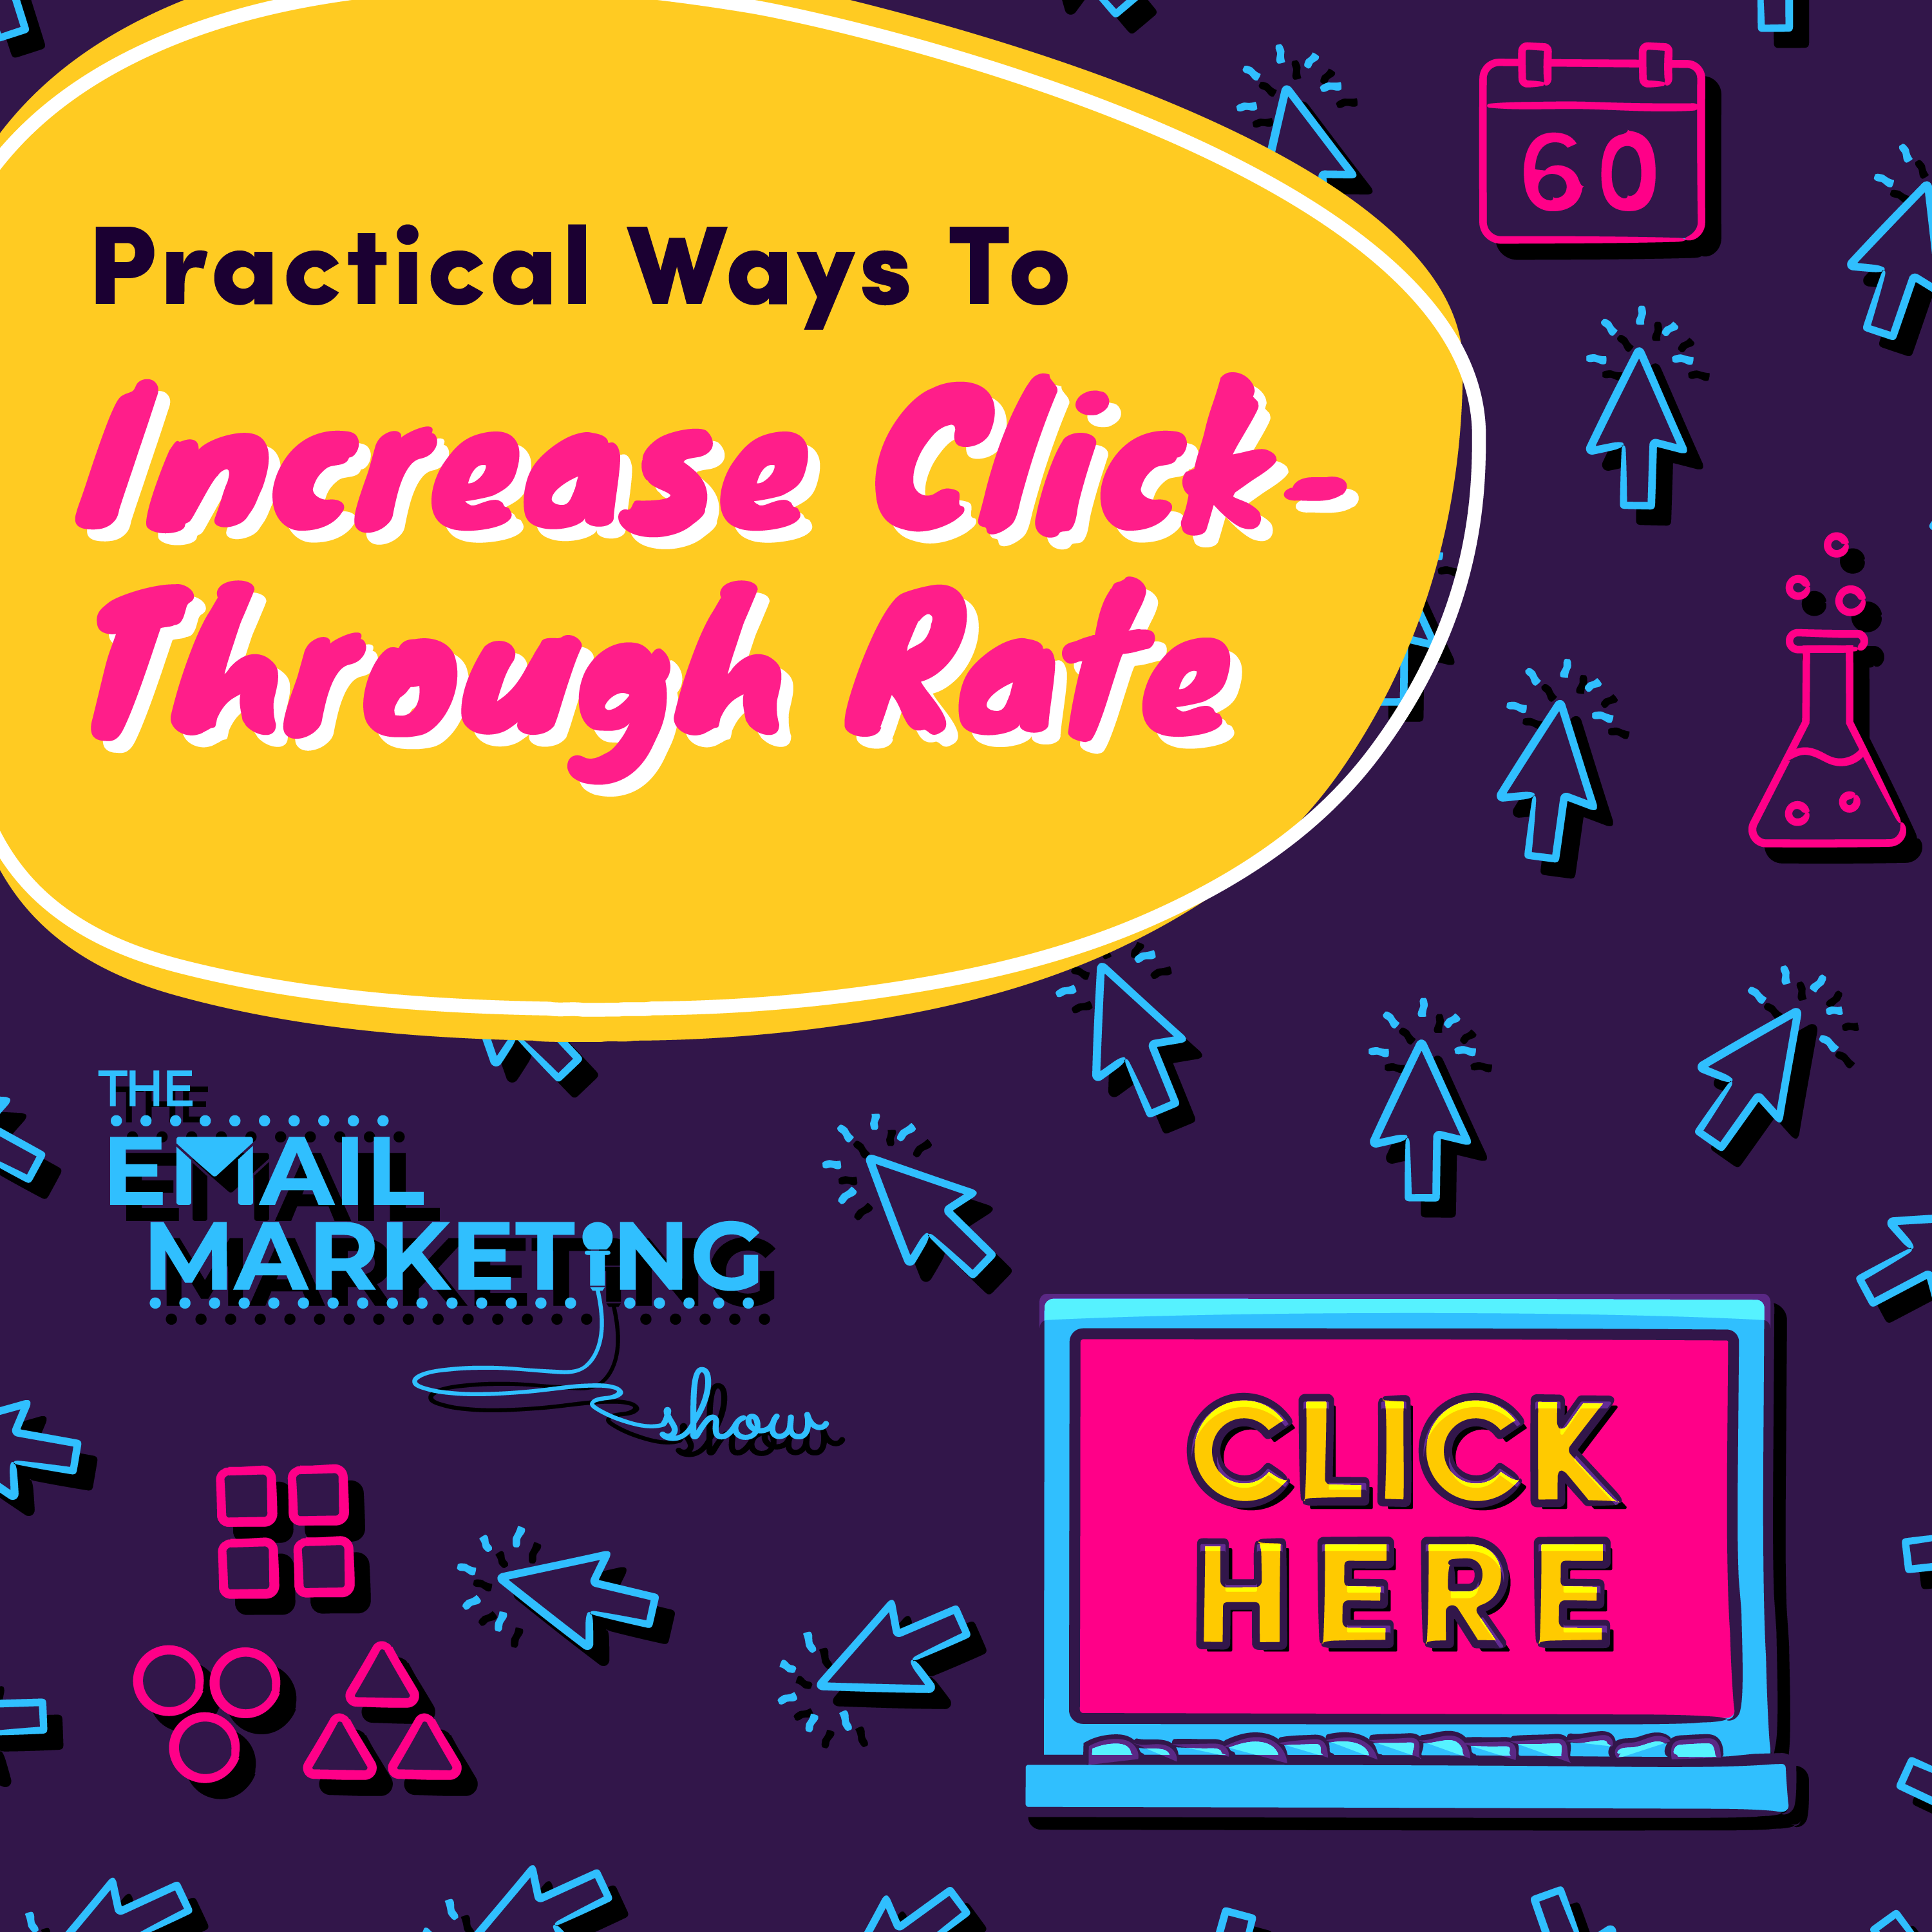 Practical Ways To Increase Click-Through Rate